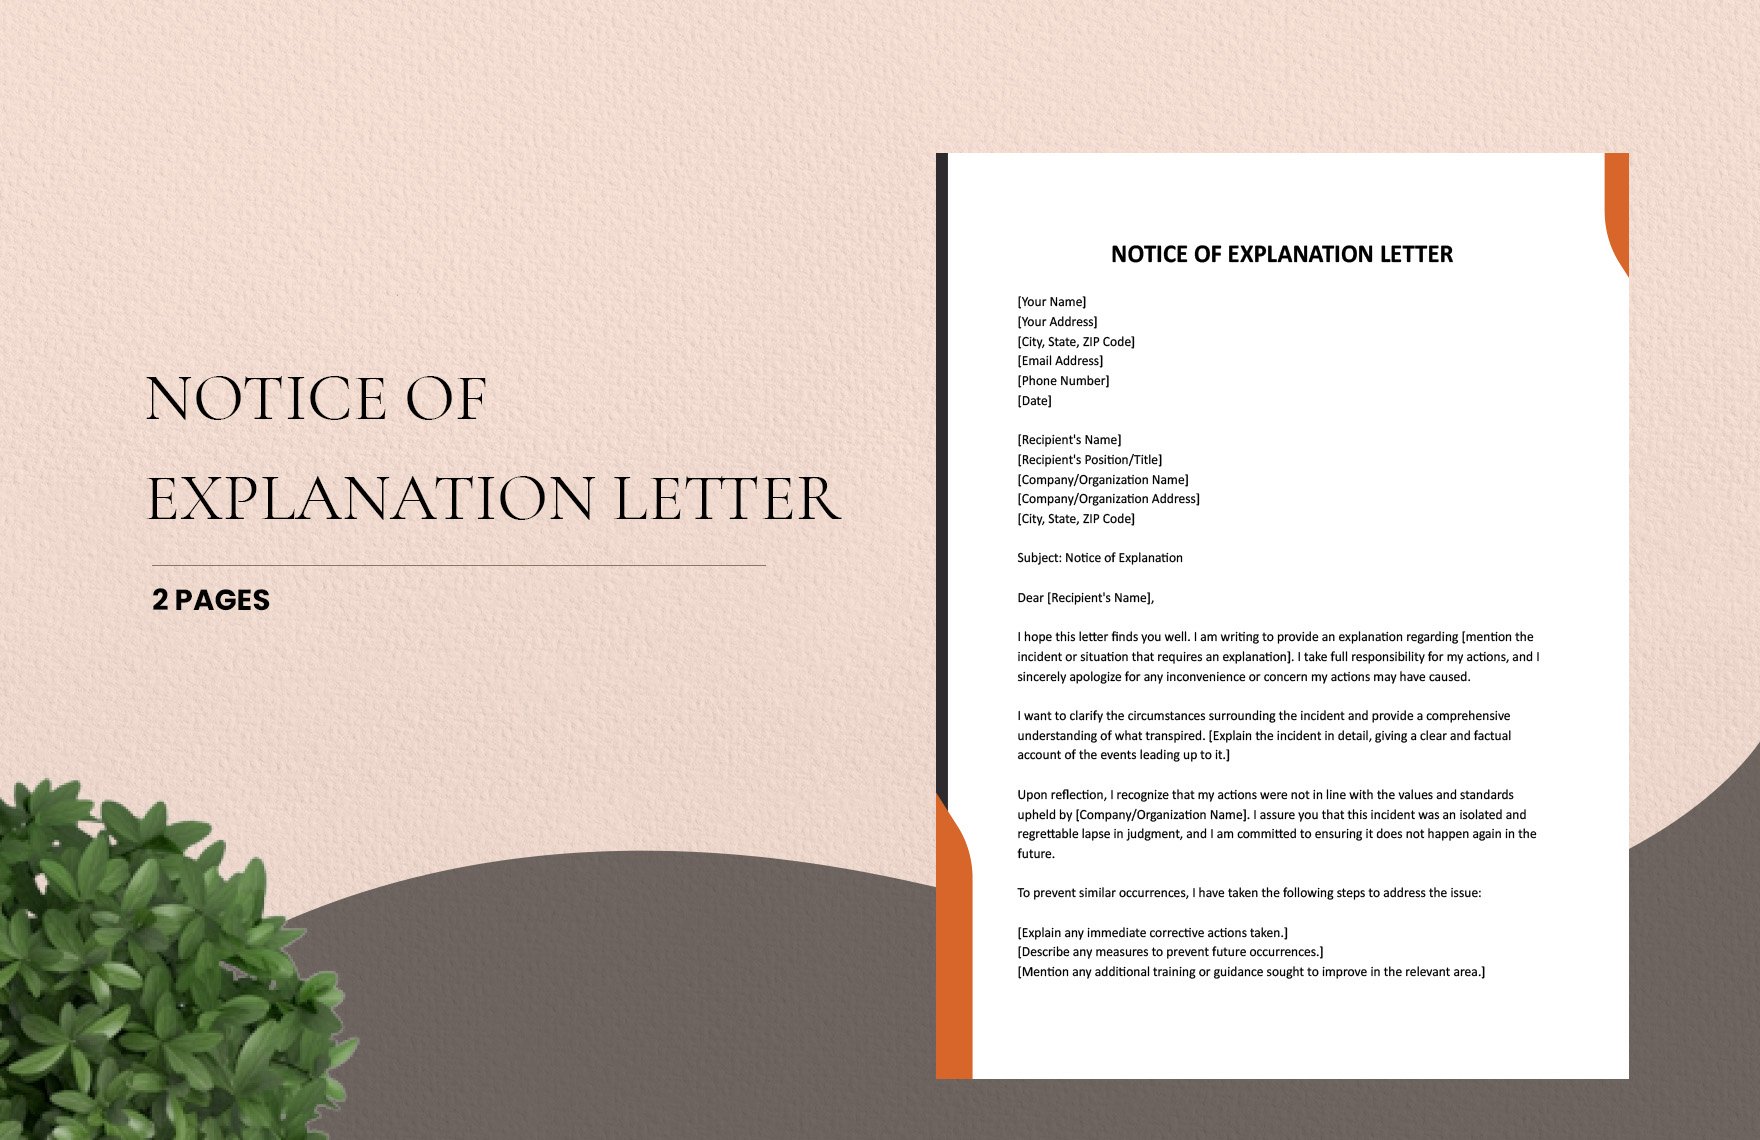 Notice of explanation letter